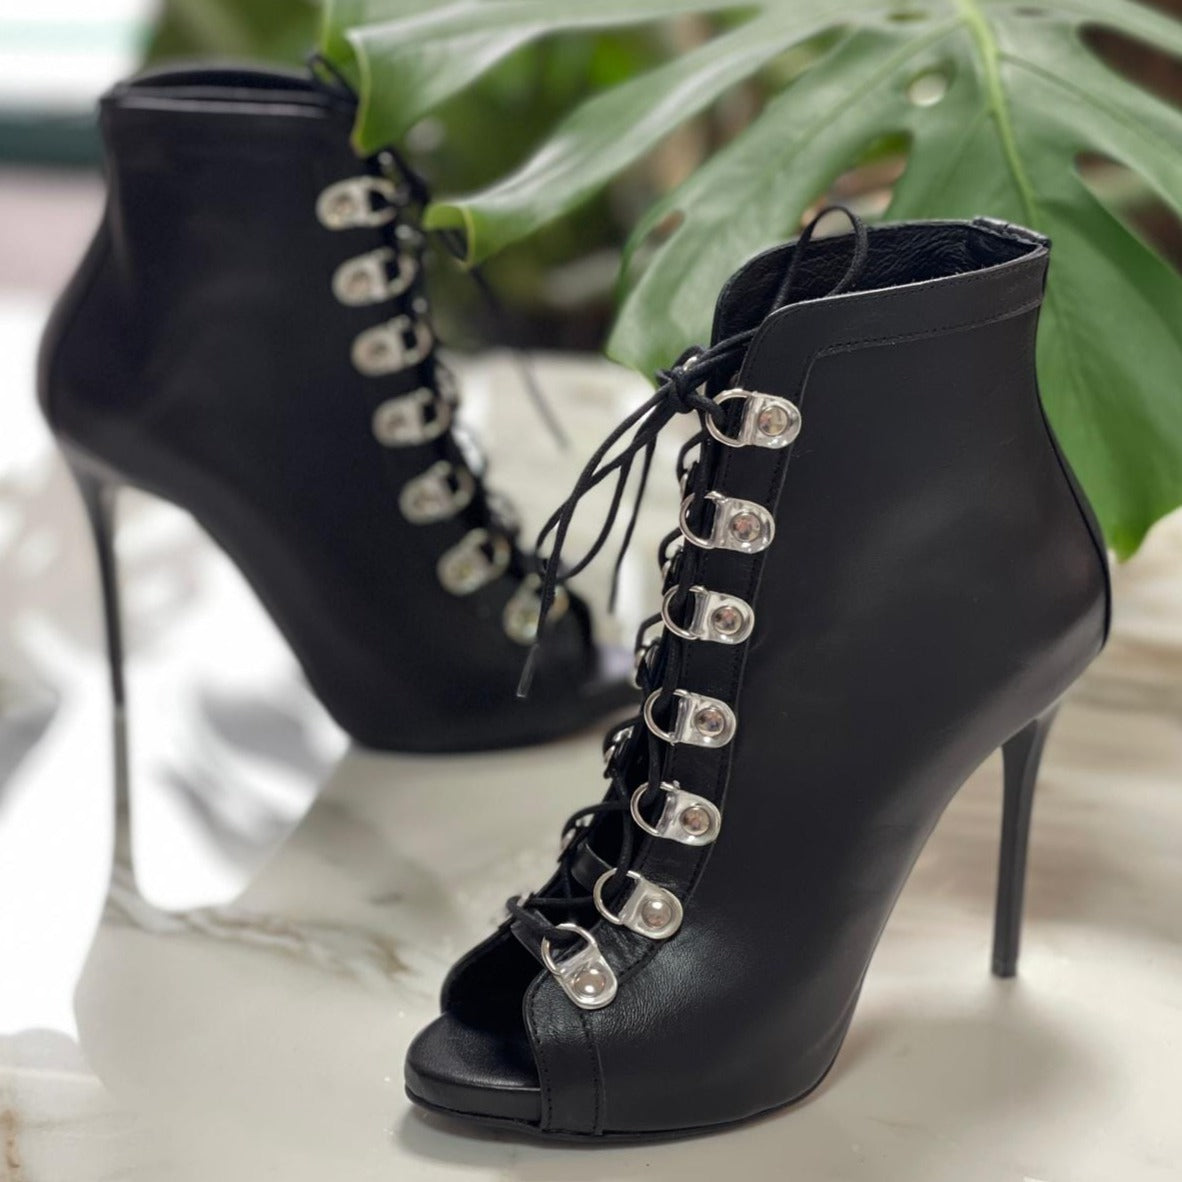 Black leather tie up gladiator boots